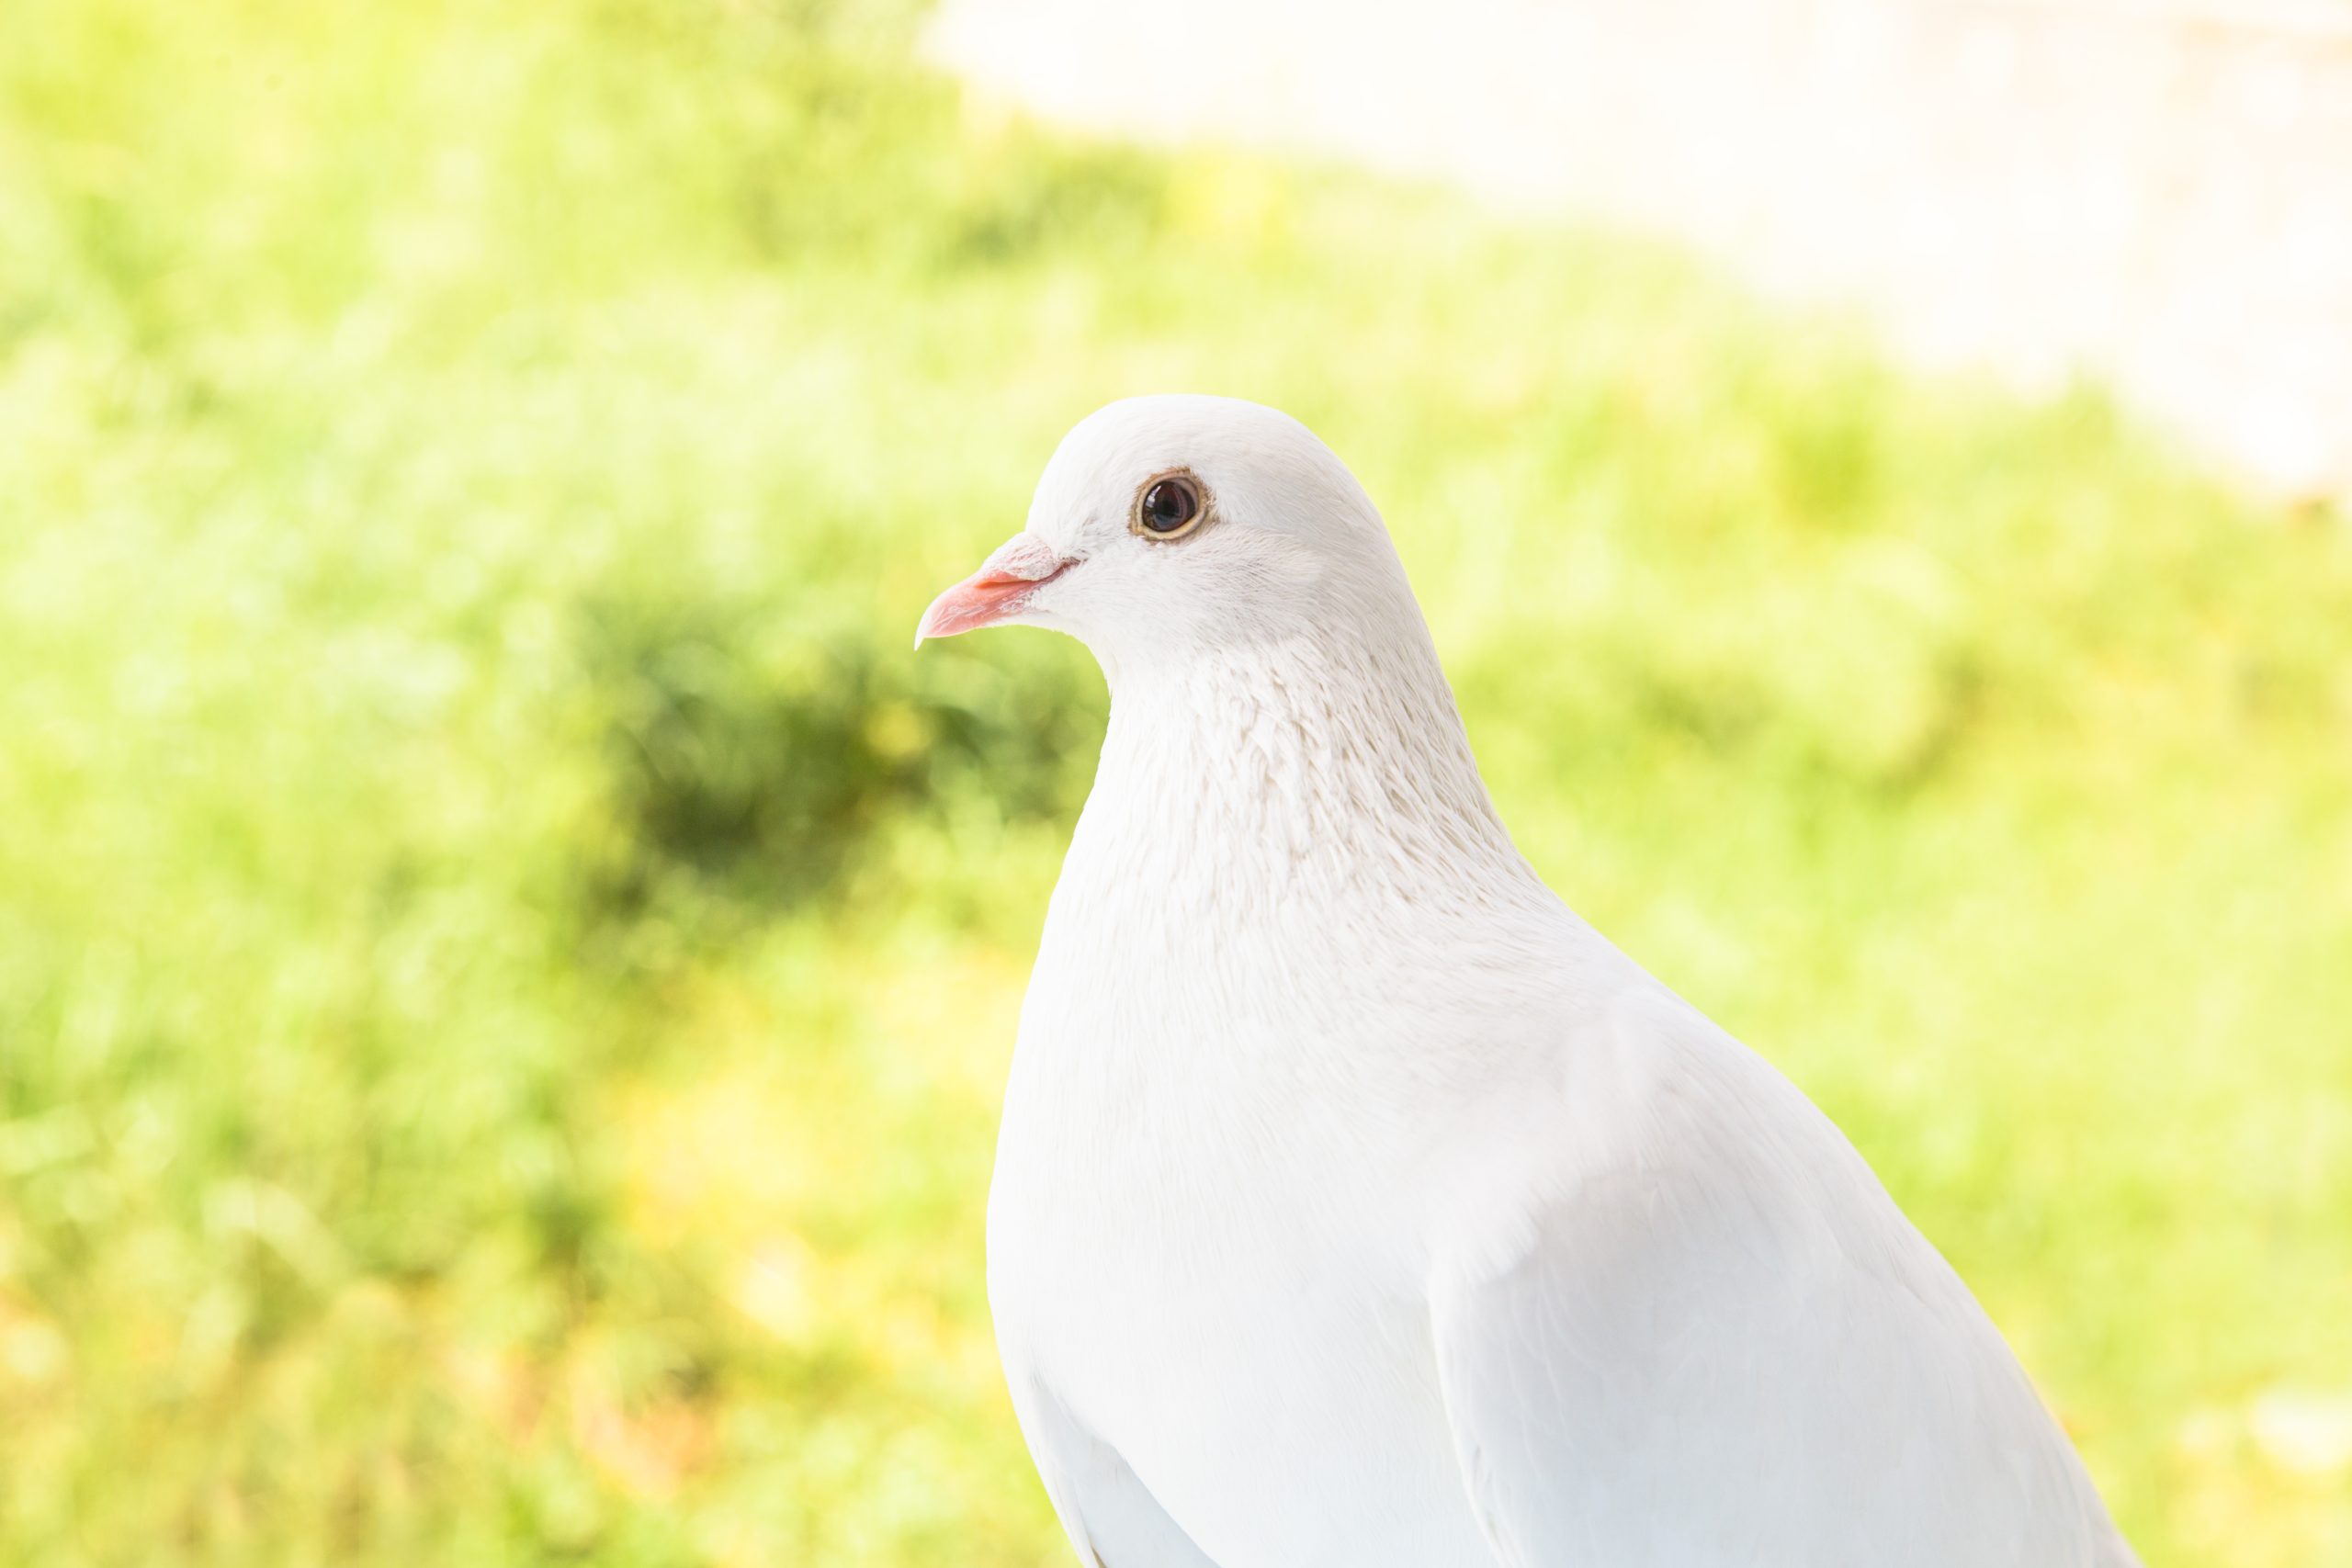 Is It Rare to See a White Dove